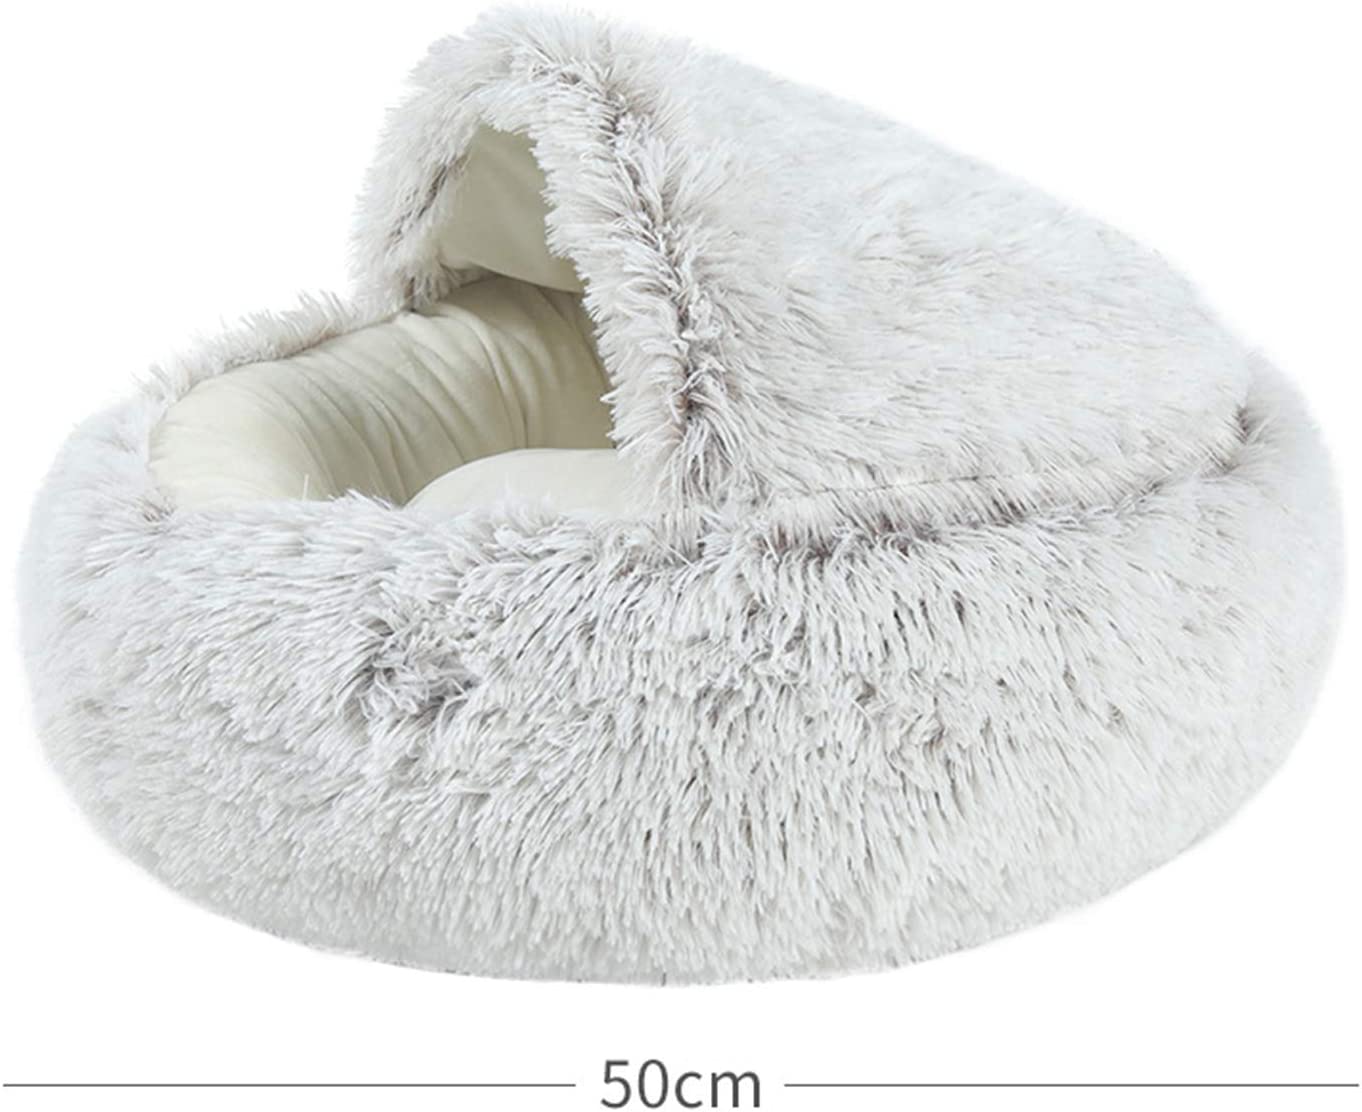 Dog Cat Bed Round Plush Cat Warm Bed House Soft Long Plush Bed For Small Dogs Cats Nest Donut Warming Sleeping Bed